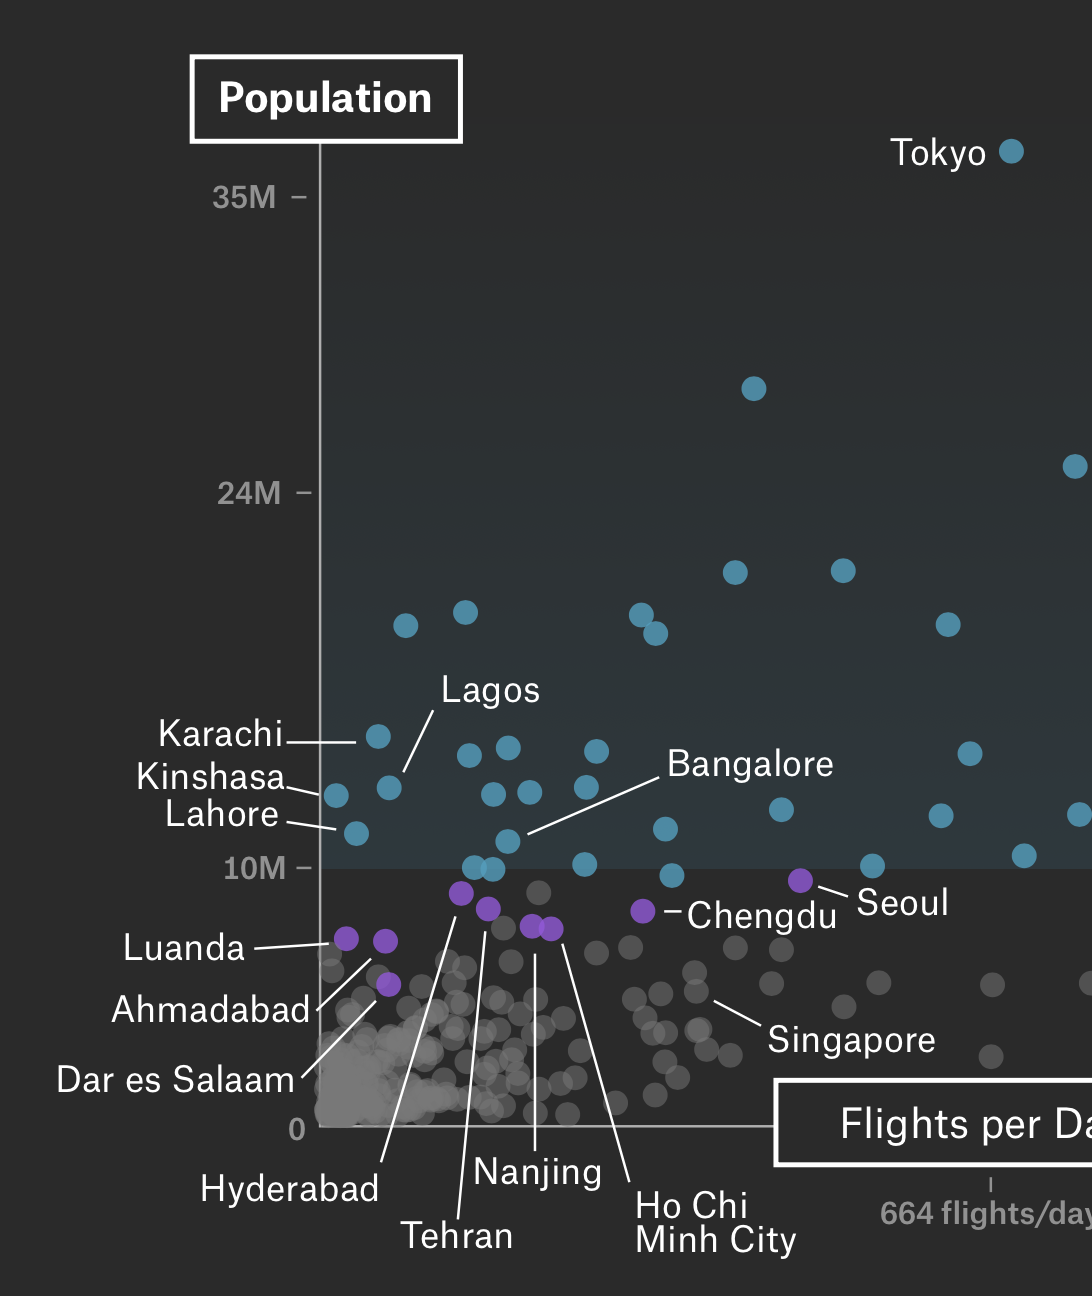 Chart showing Airports and world's megacities